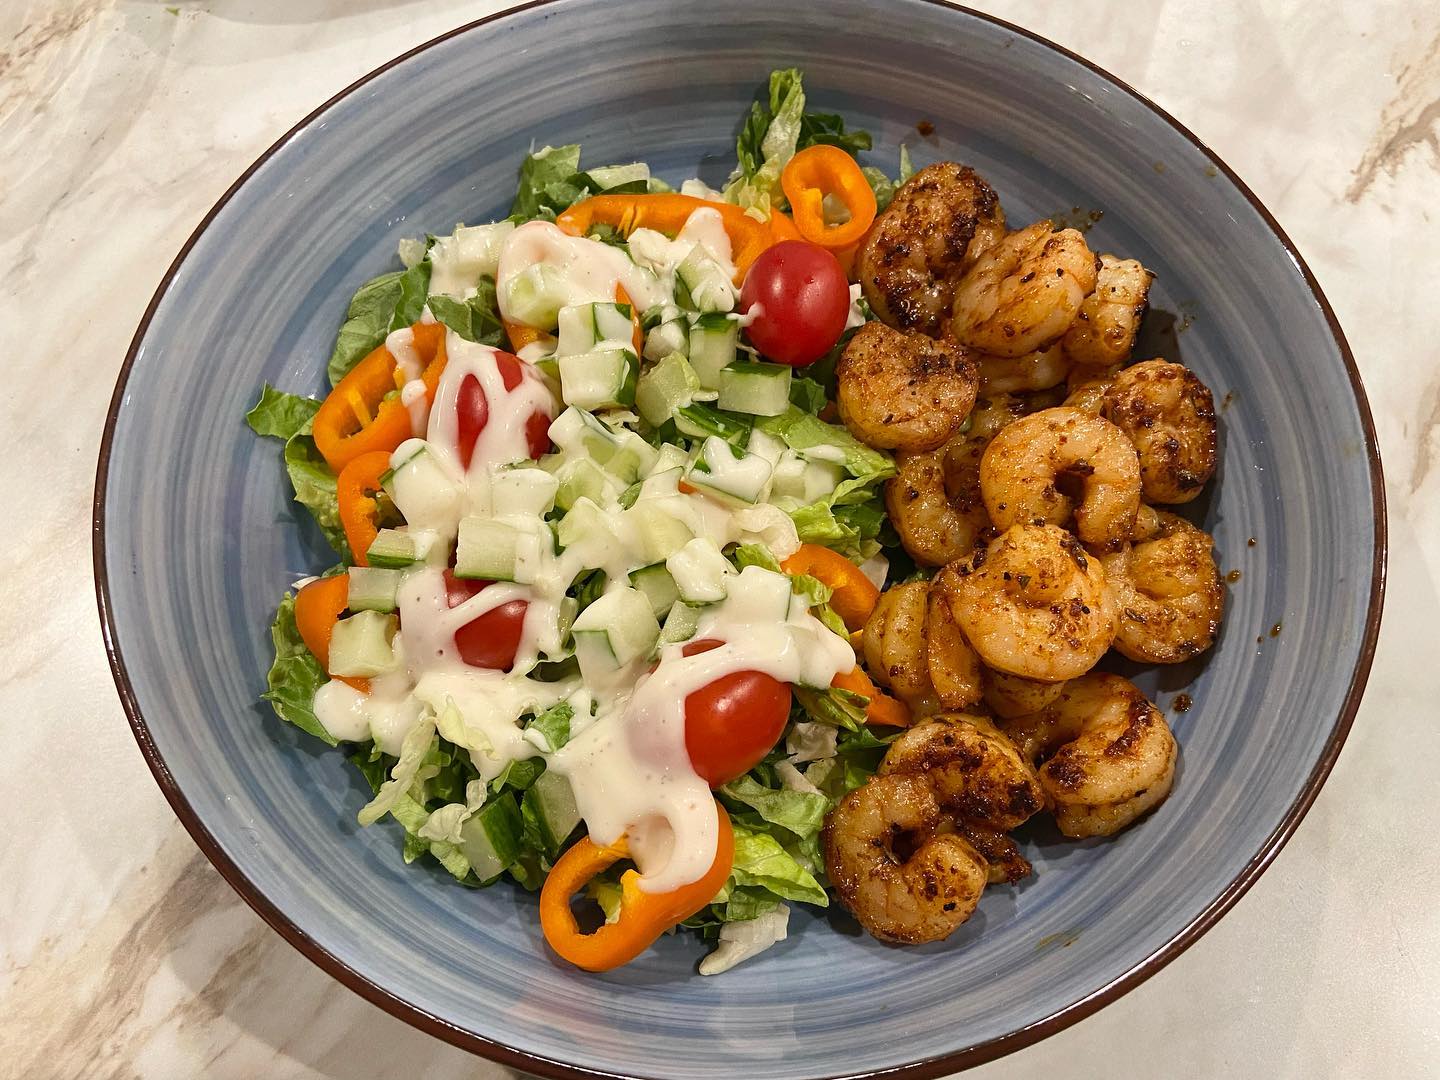 Low carb and yummy! This was dinner earlier tonight. 😍 Blackened shrimp and a crisp green salad 🥗🍤I can eat salad all year round. What about you? #whatsfordinner #saladlover #lowcarb #deliciousness #eeeeeats